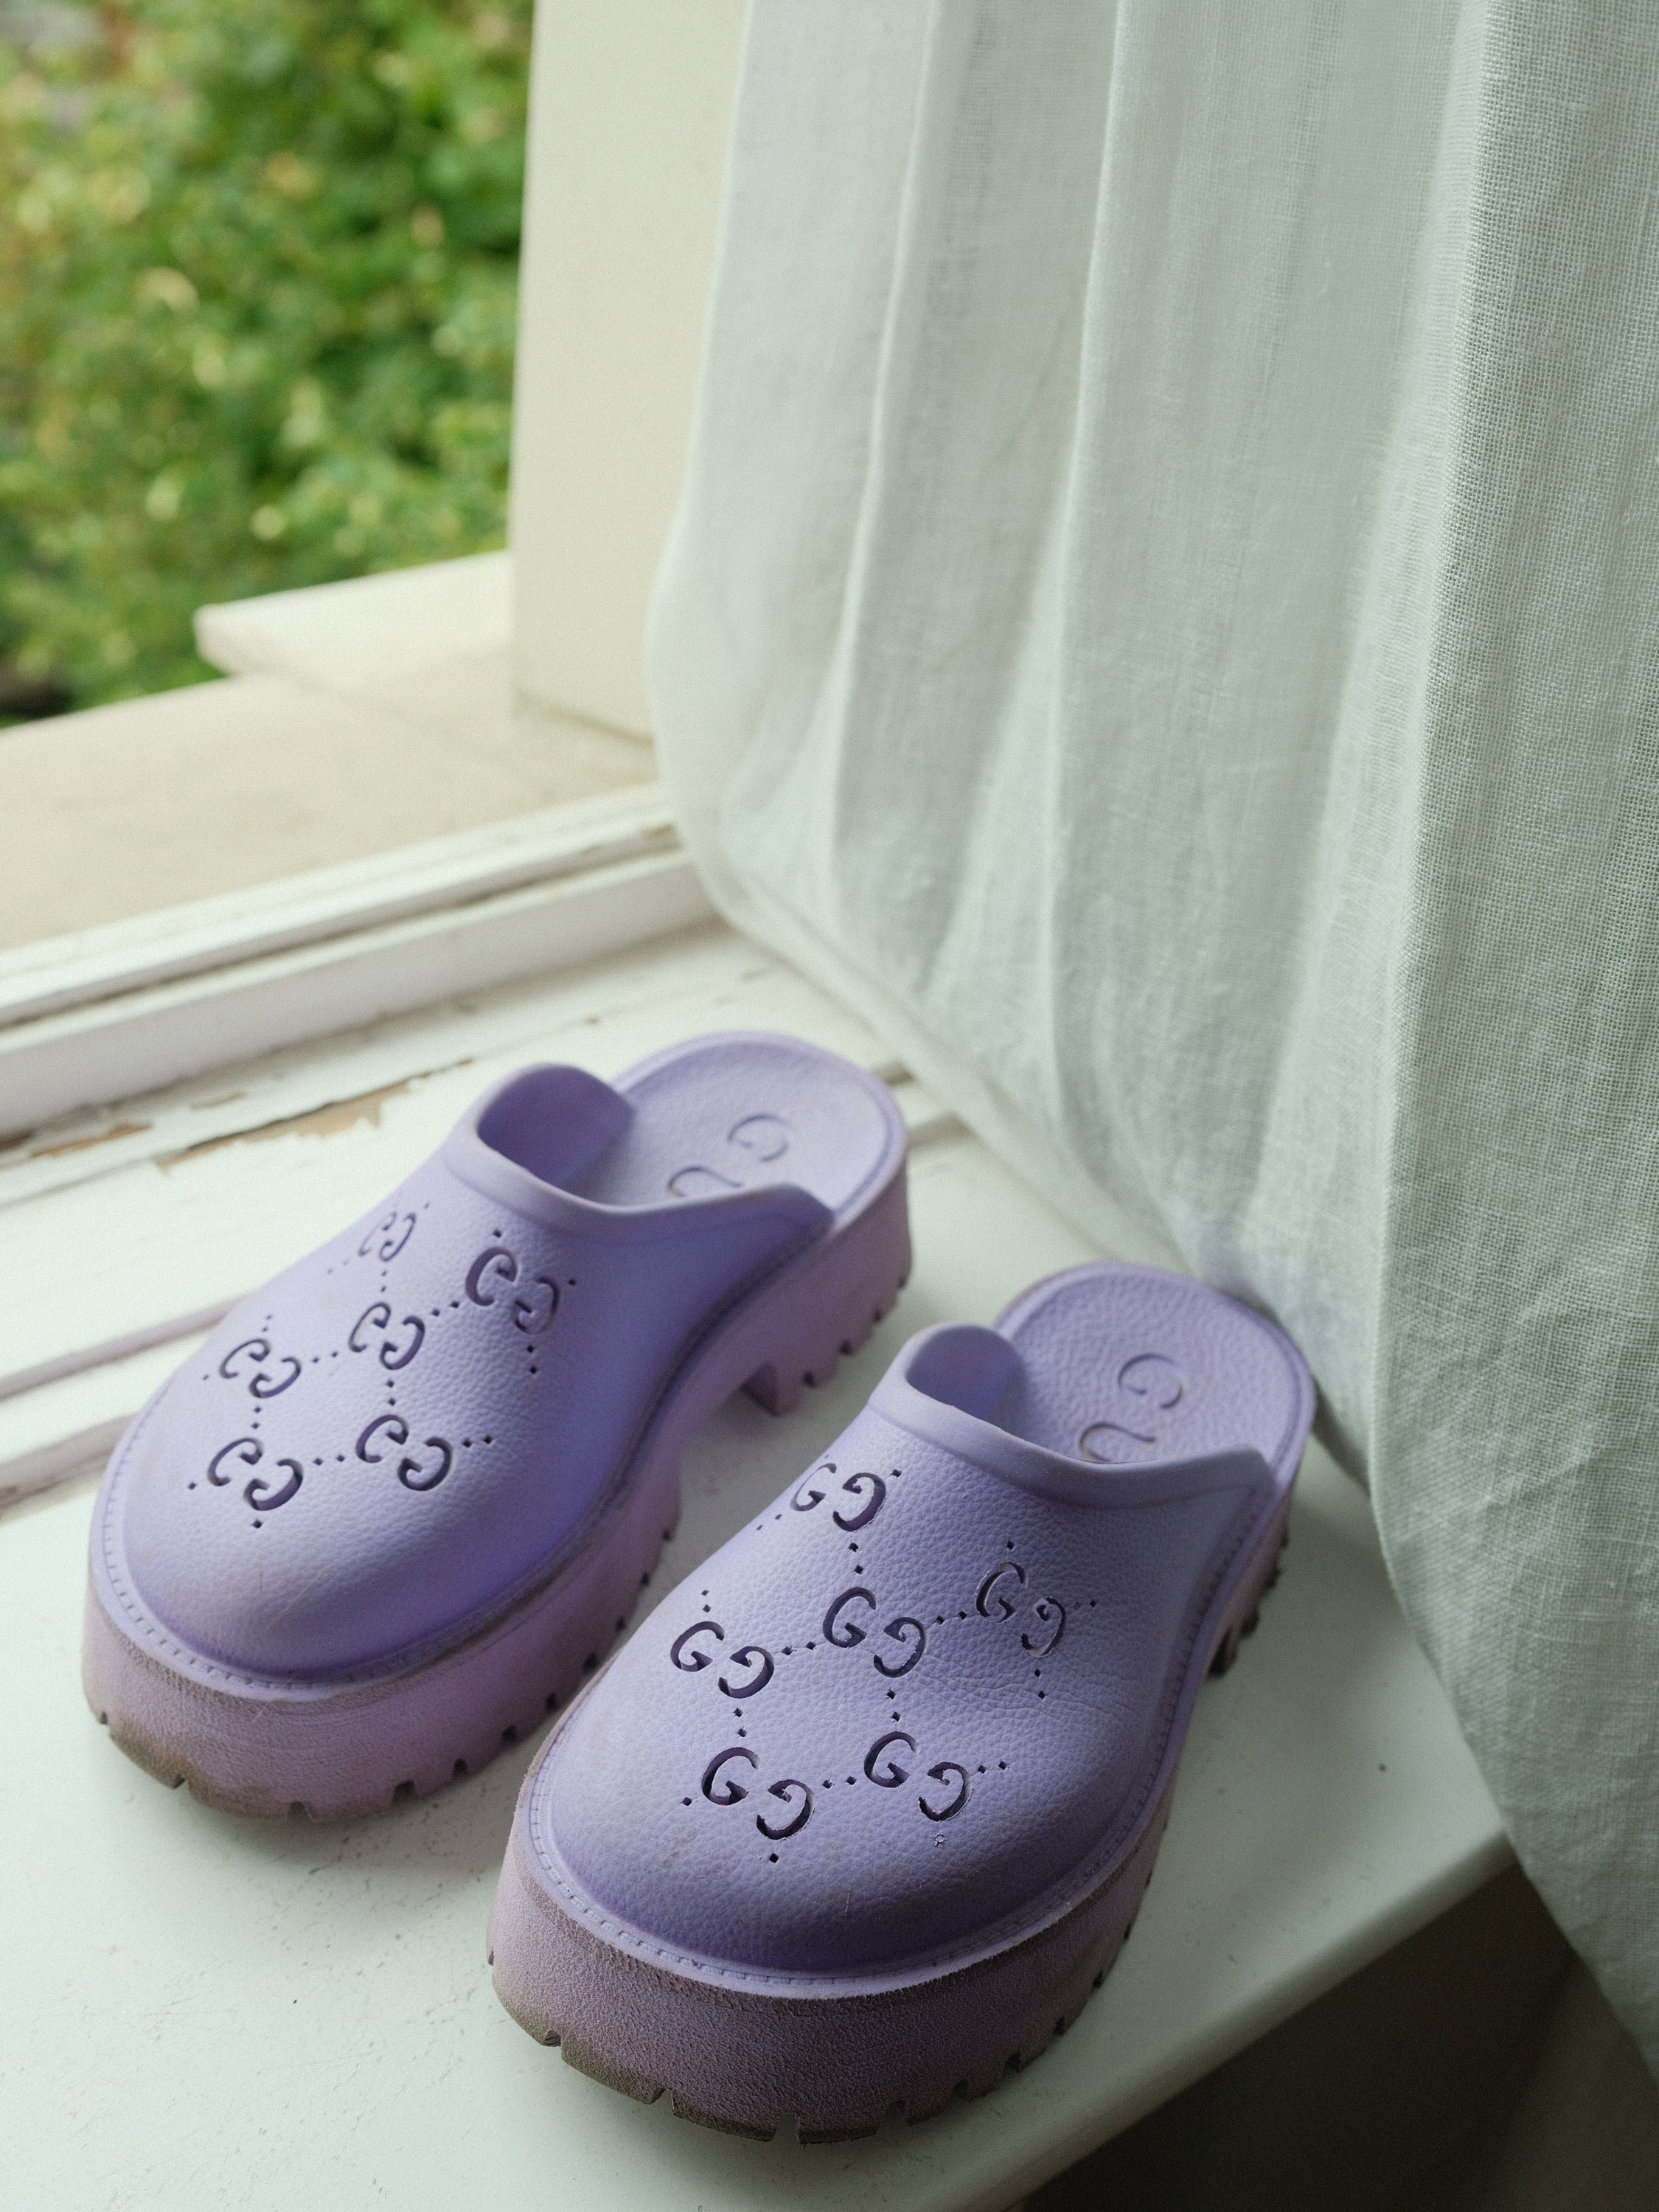 Gucci Lavender perforated rubber croc clogs 38